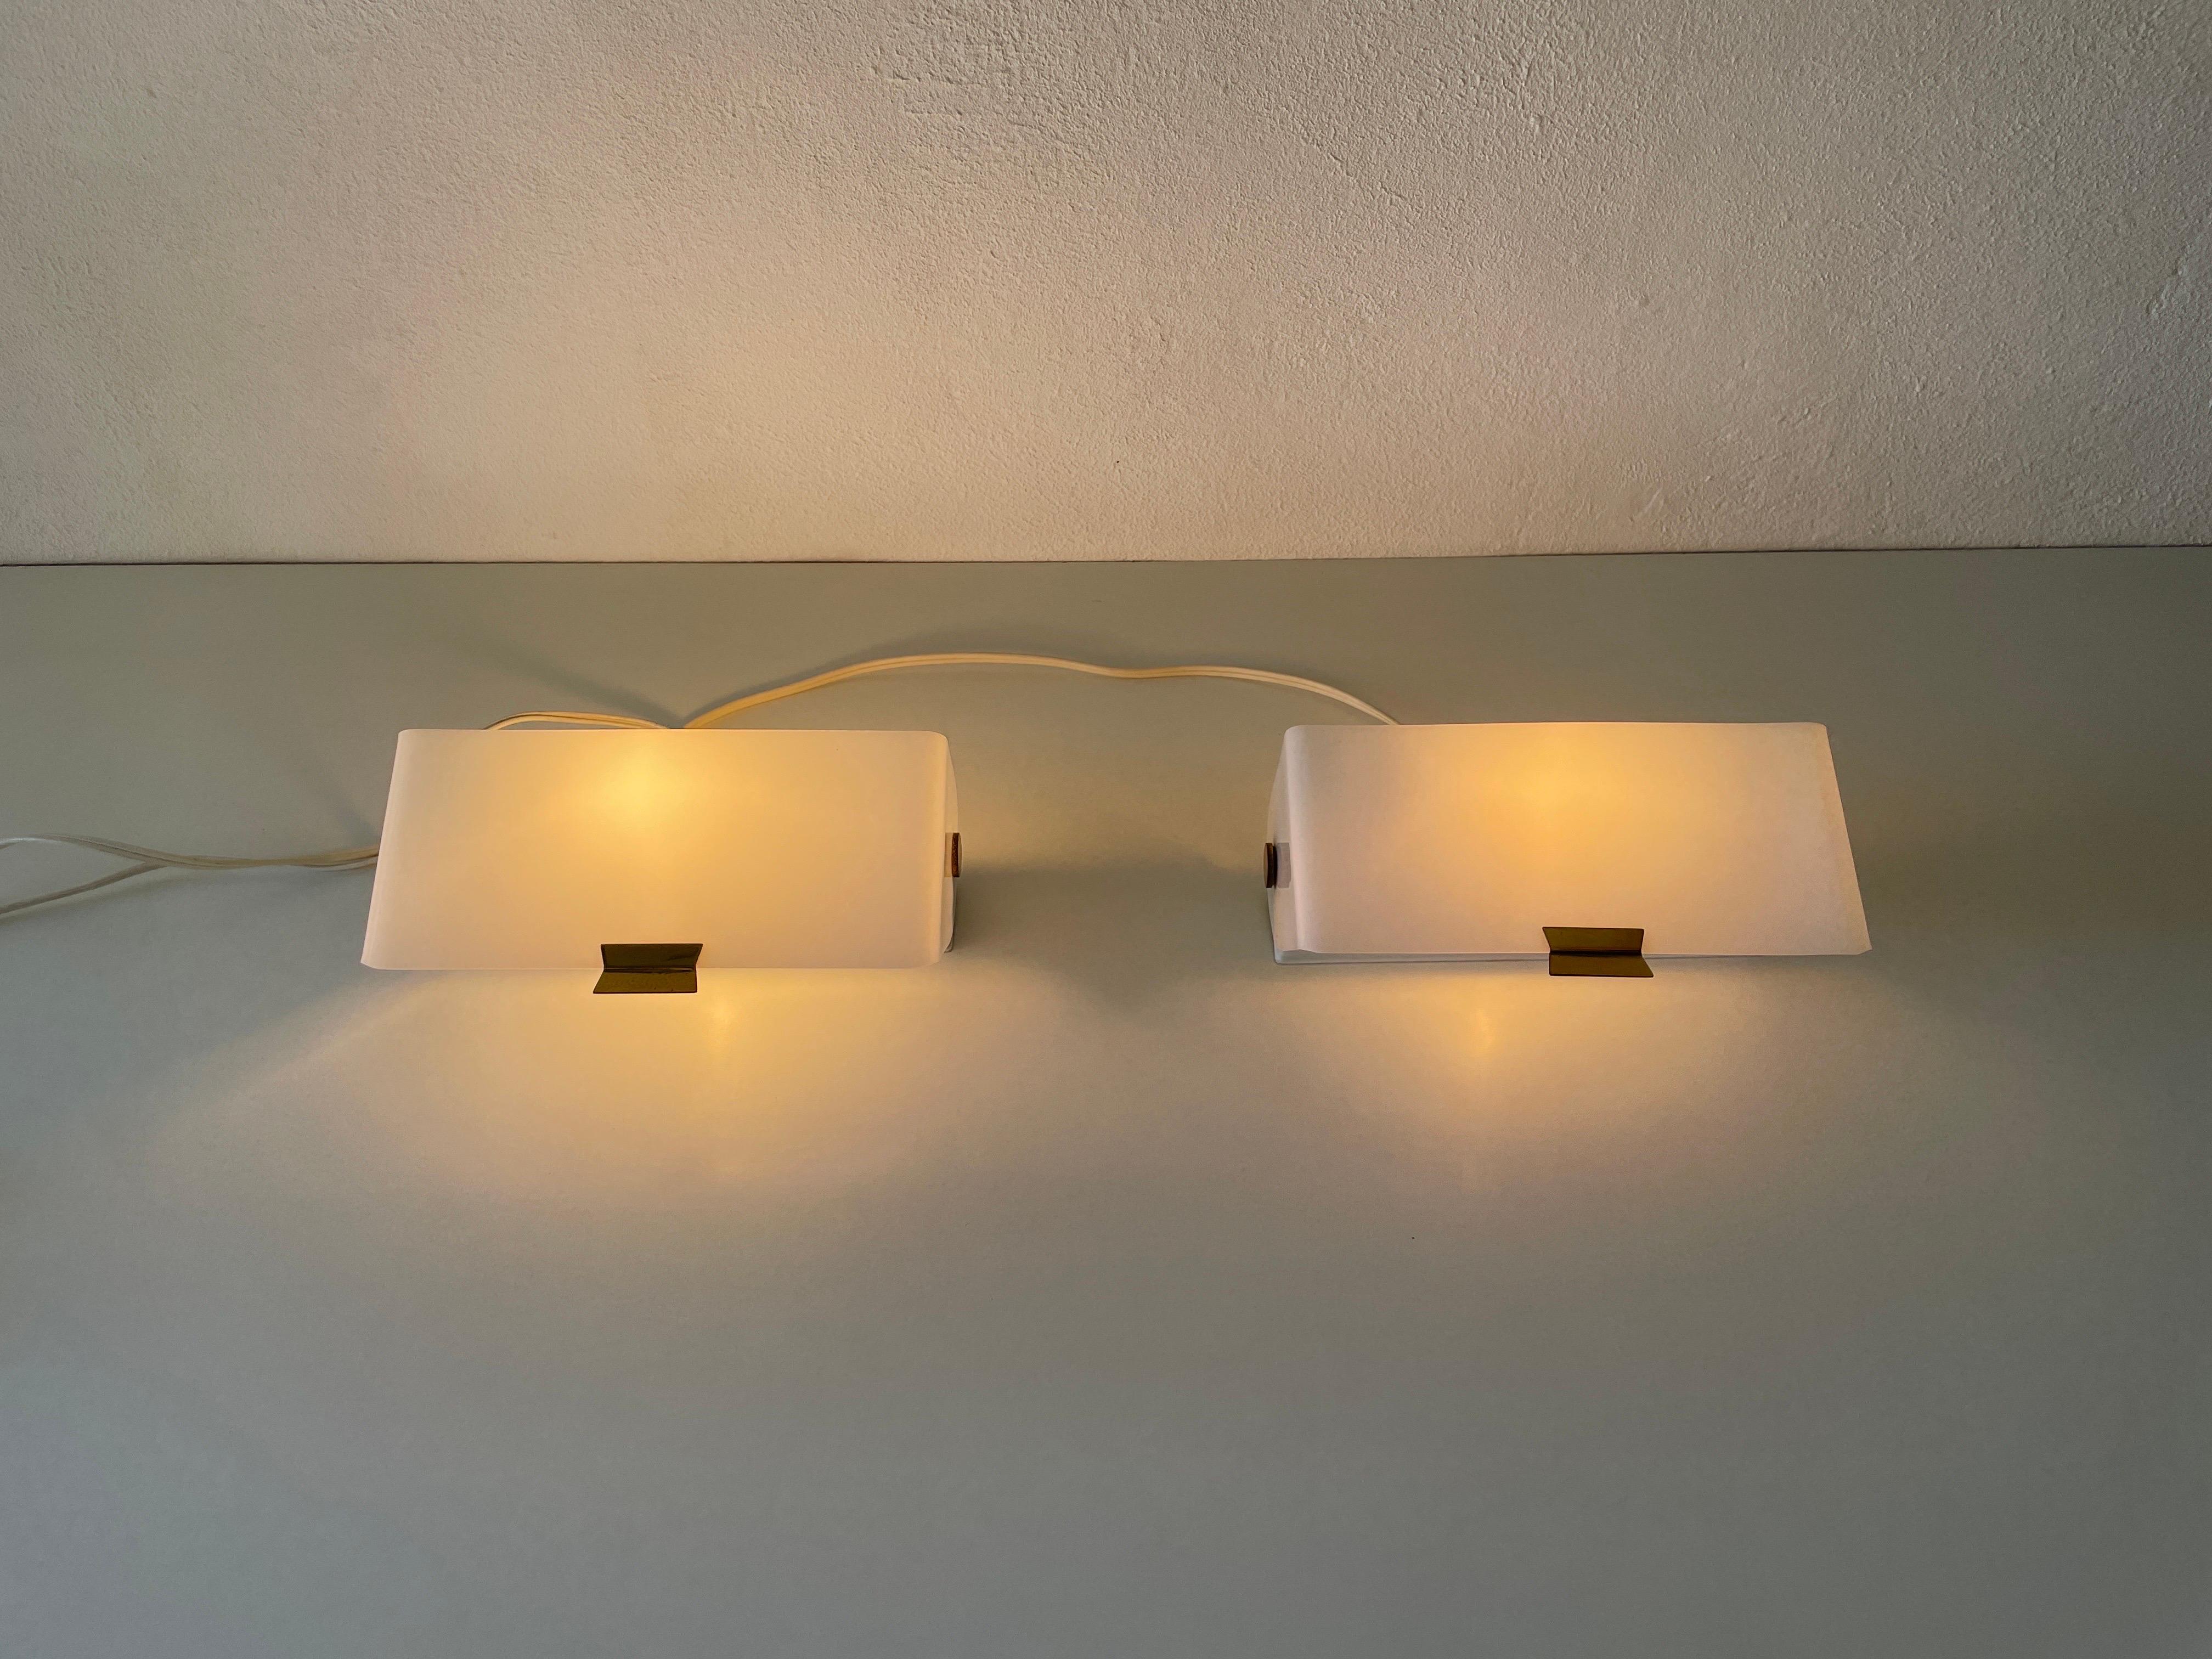 White Plexiglass Adjustable Shade Pair of Sconces, 1950s, Germany For Sale 8